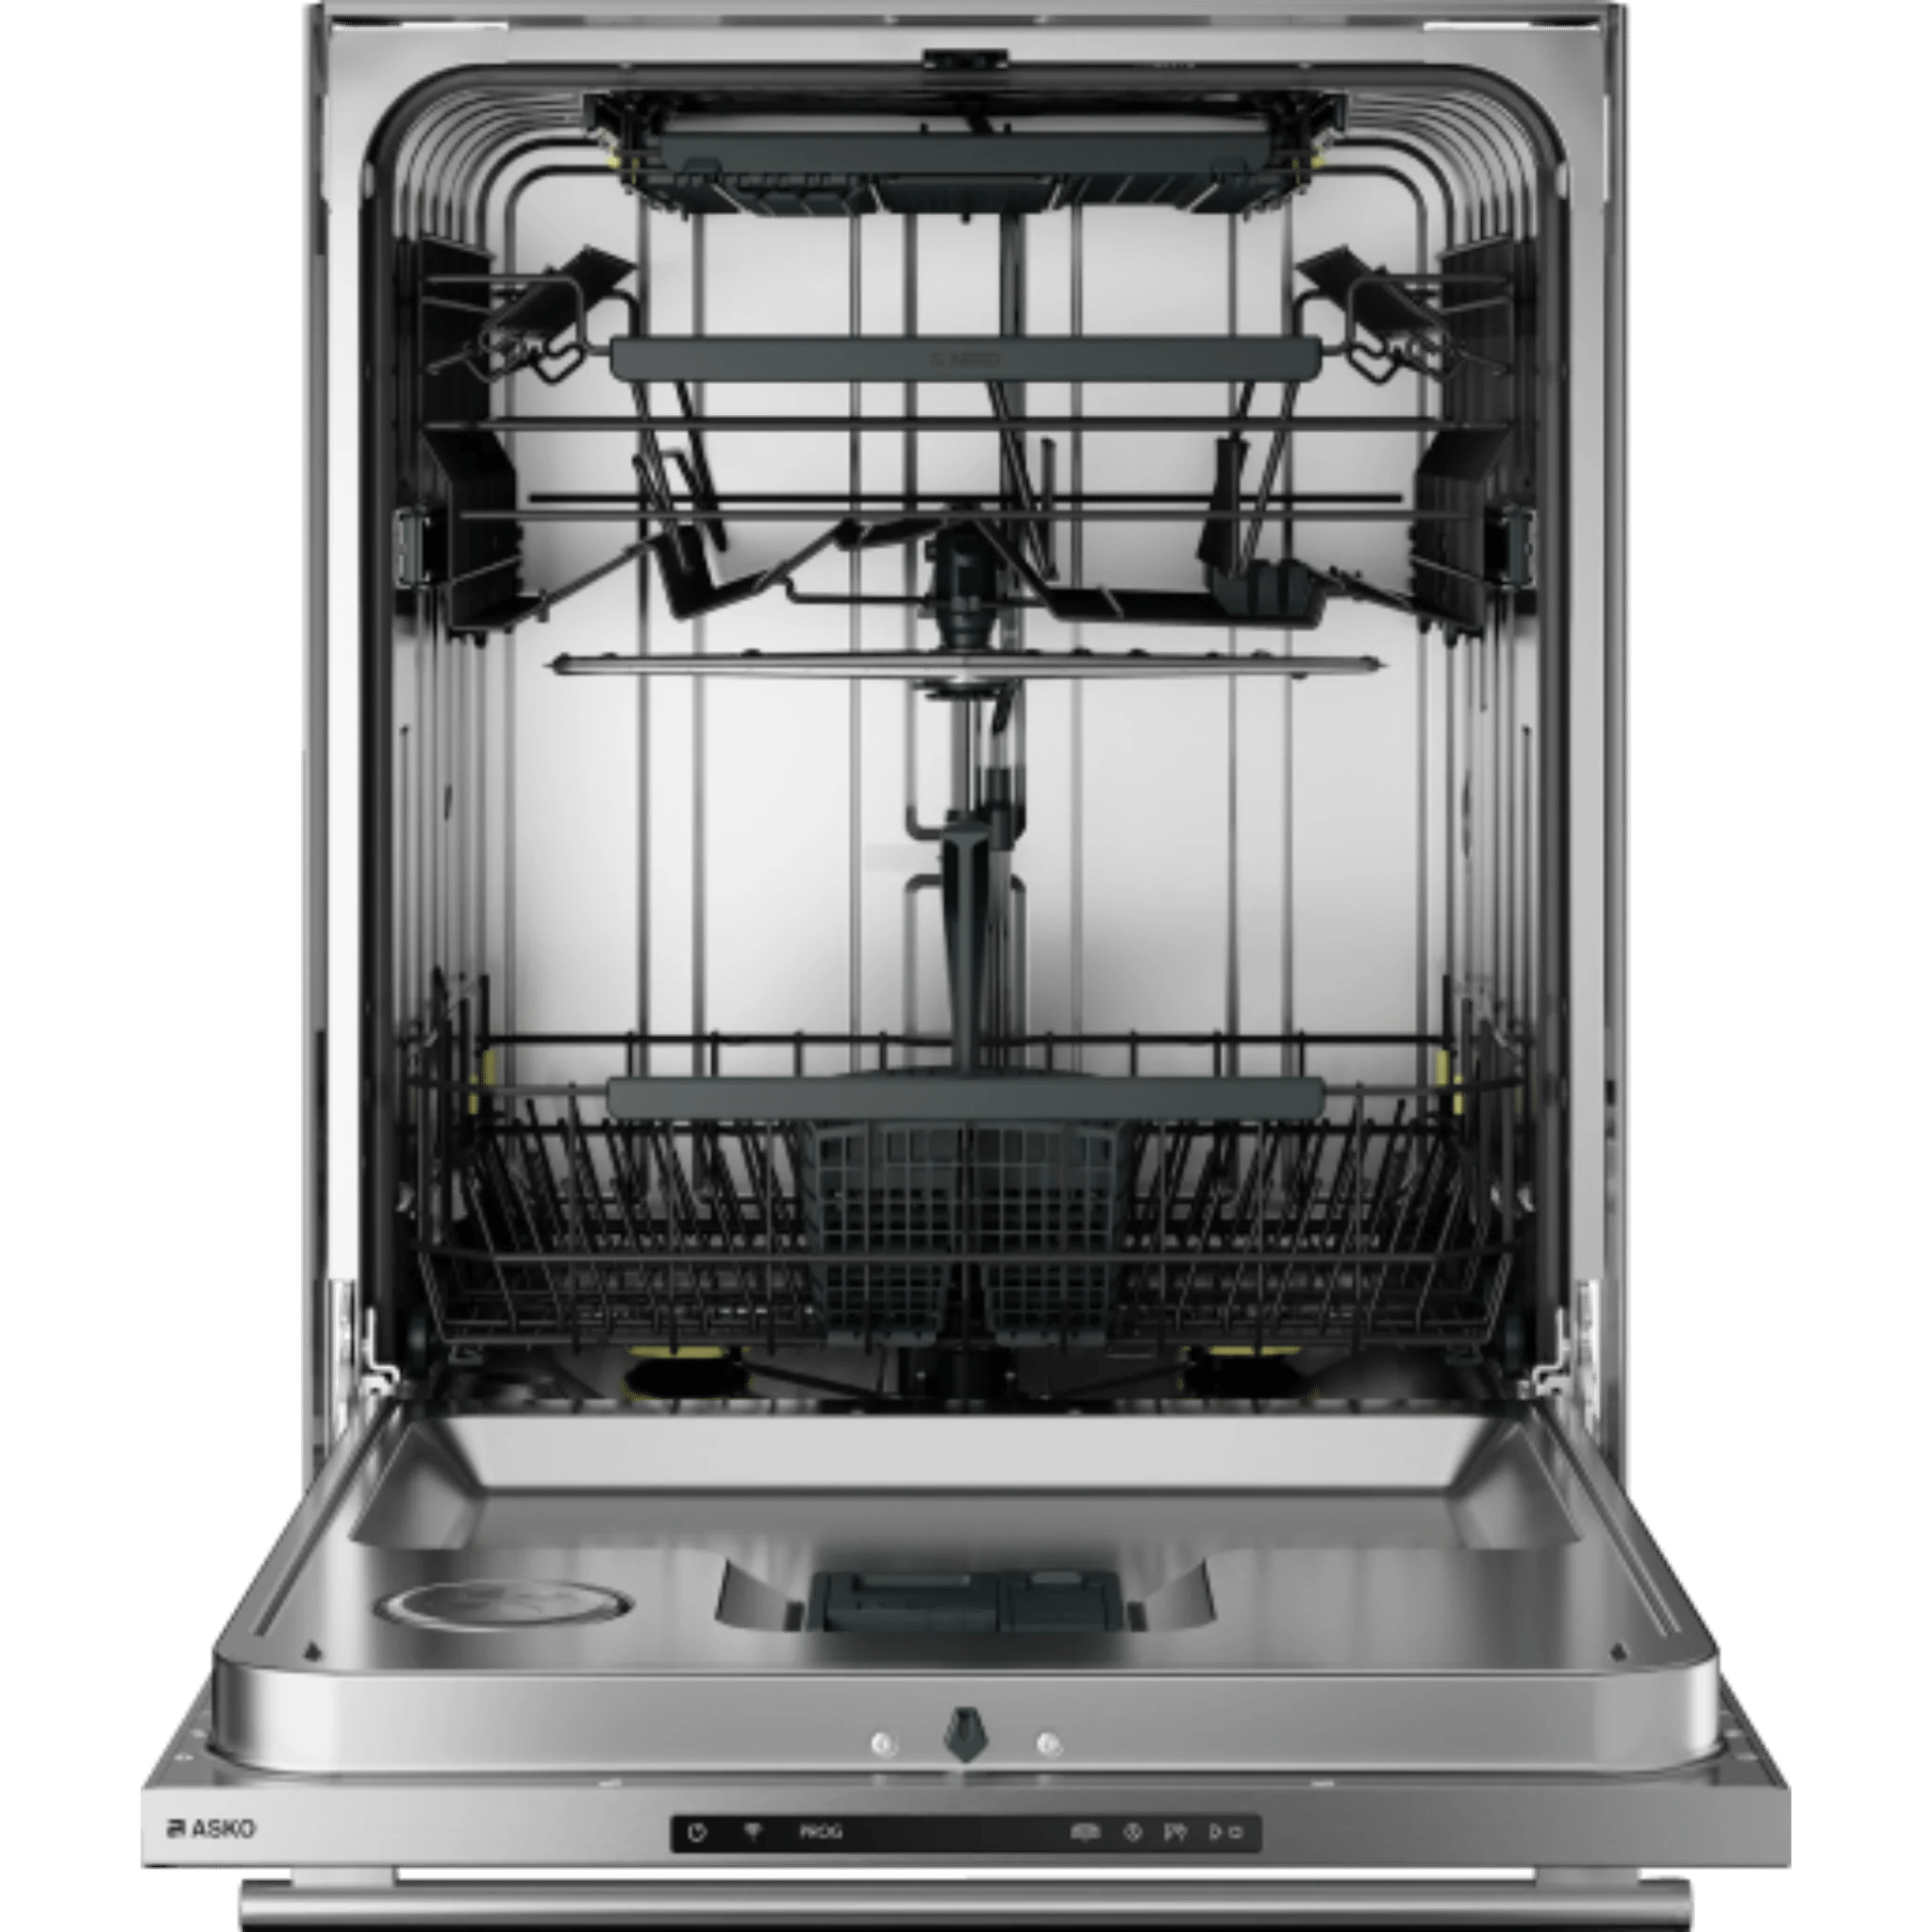 Asko Logic 24 Inch Wide 16 Place Setting Built-In Top Control Dishwasher with Tubular Handle, Turbo Combi Drying™, and Auto Door Open Drying™ Dishwashers DBI564THS Luxury Appliances Direct